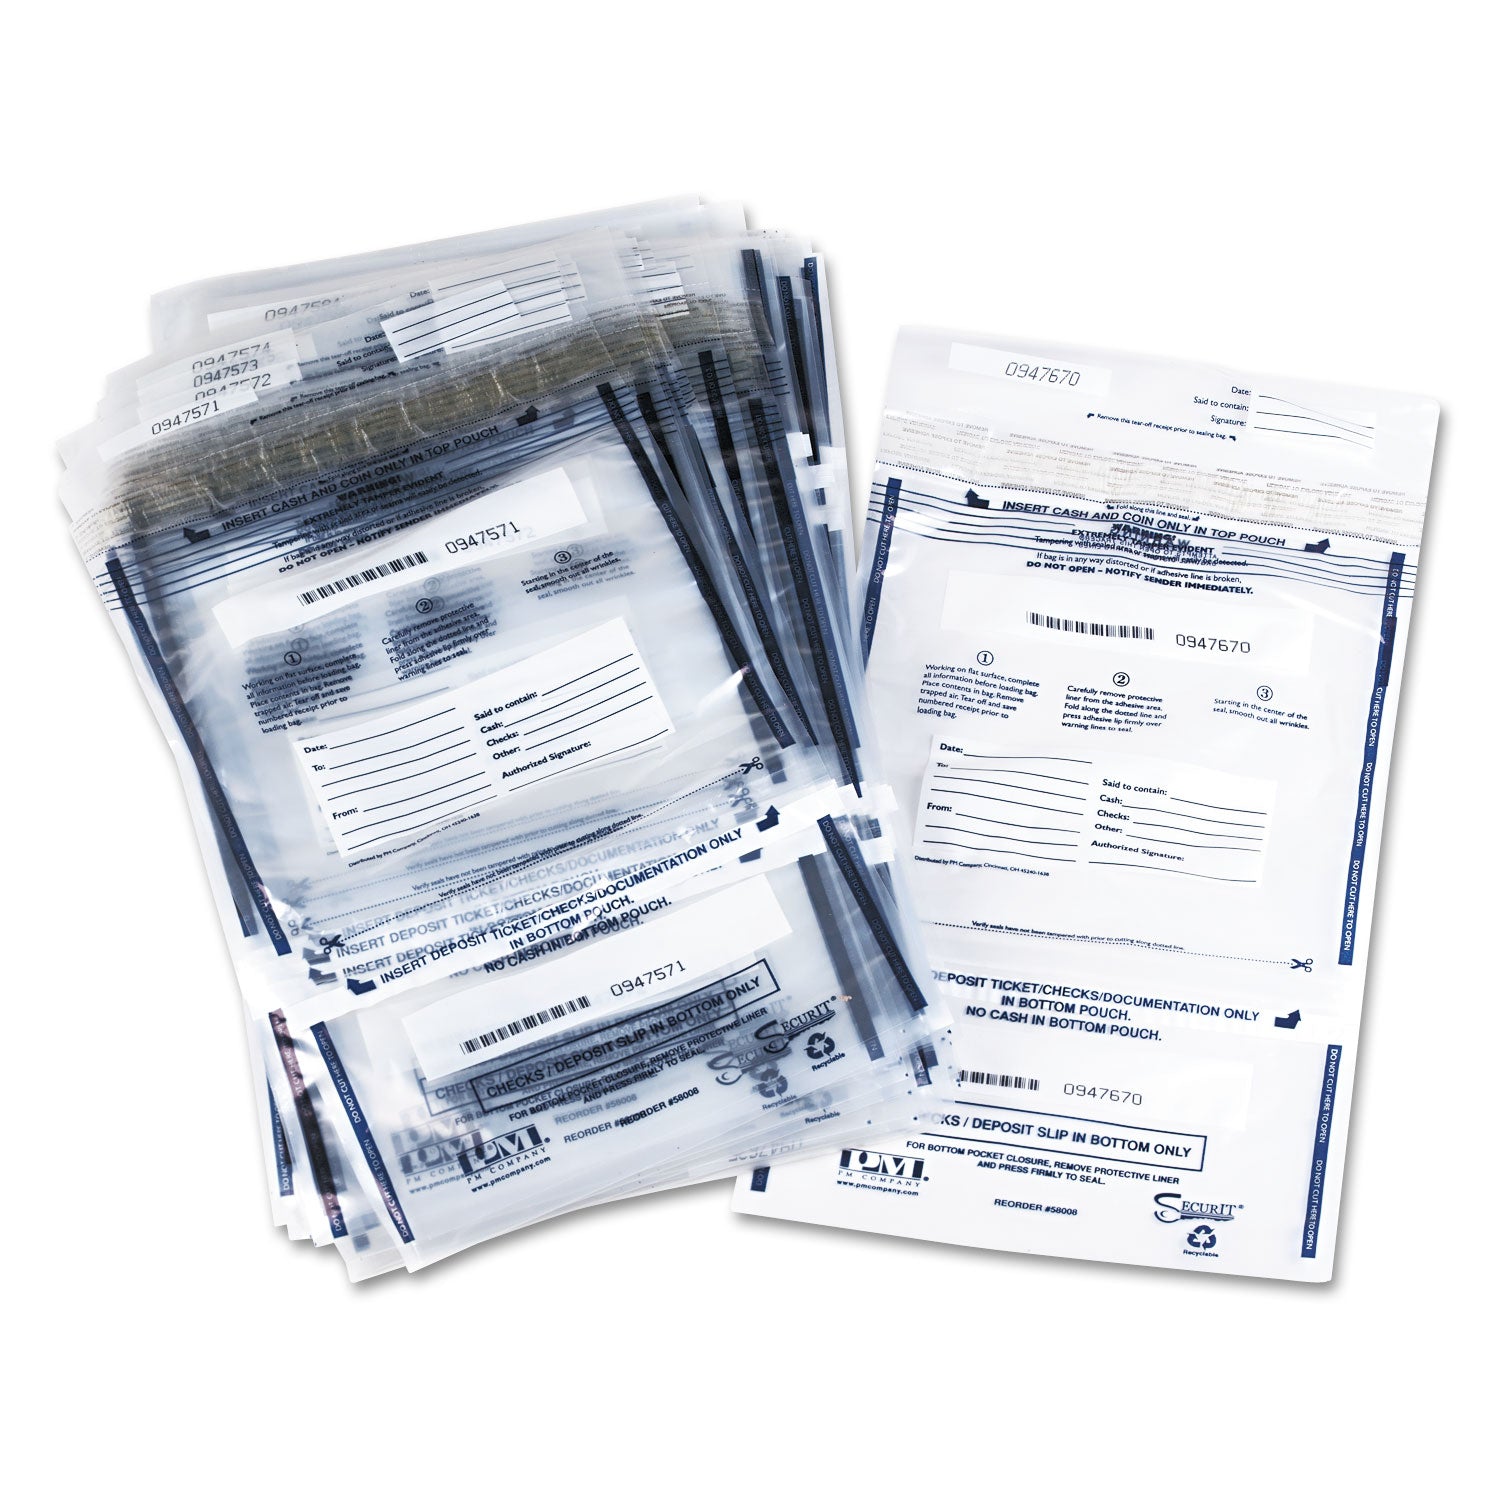 clear-dual-deposit-bags-tamper-evident-plastic-11-x-15-clear-100-pack_icx94190071 - 1